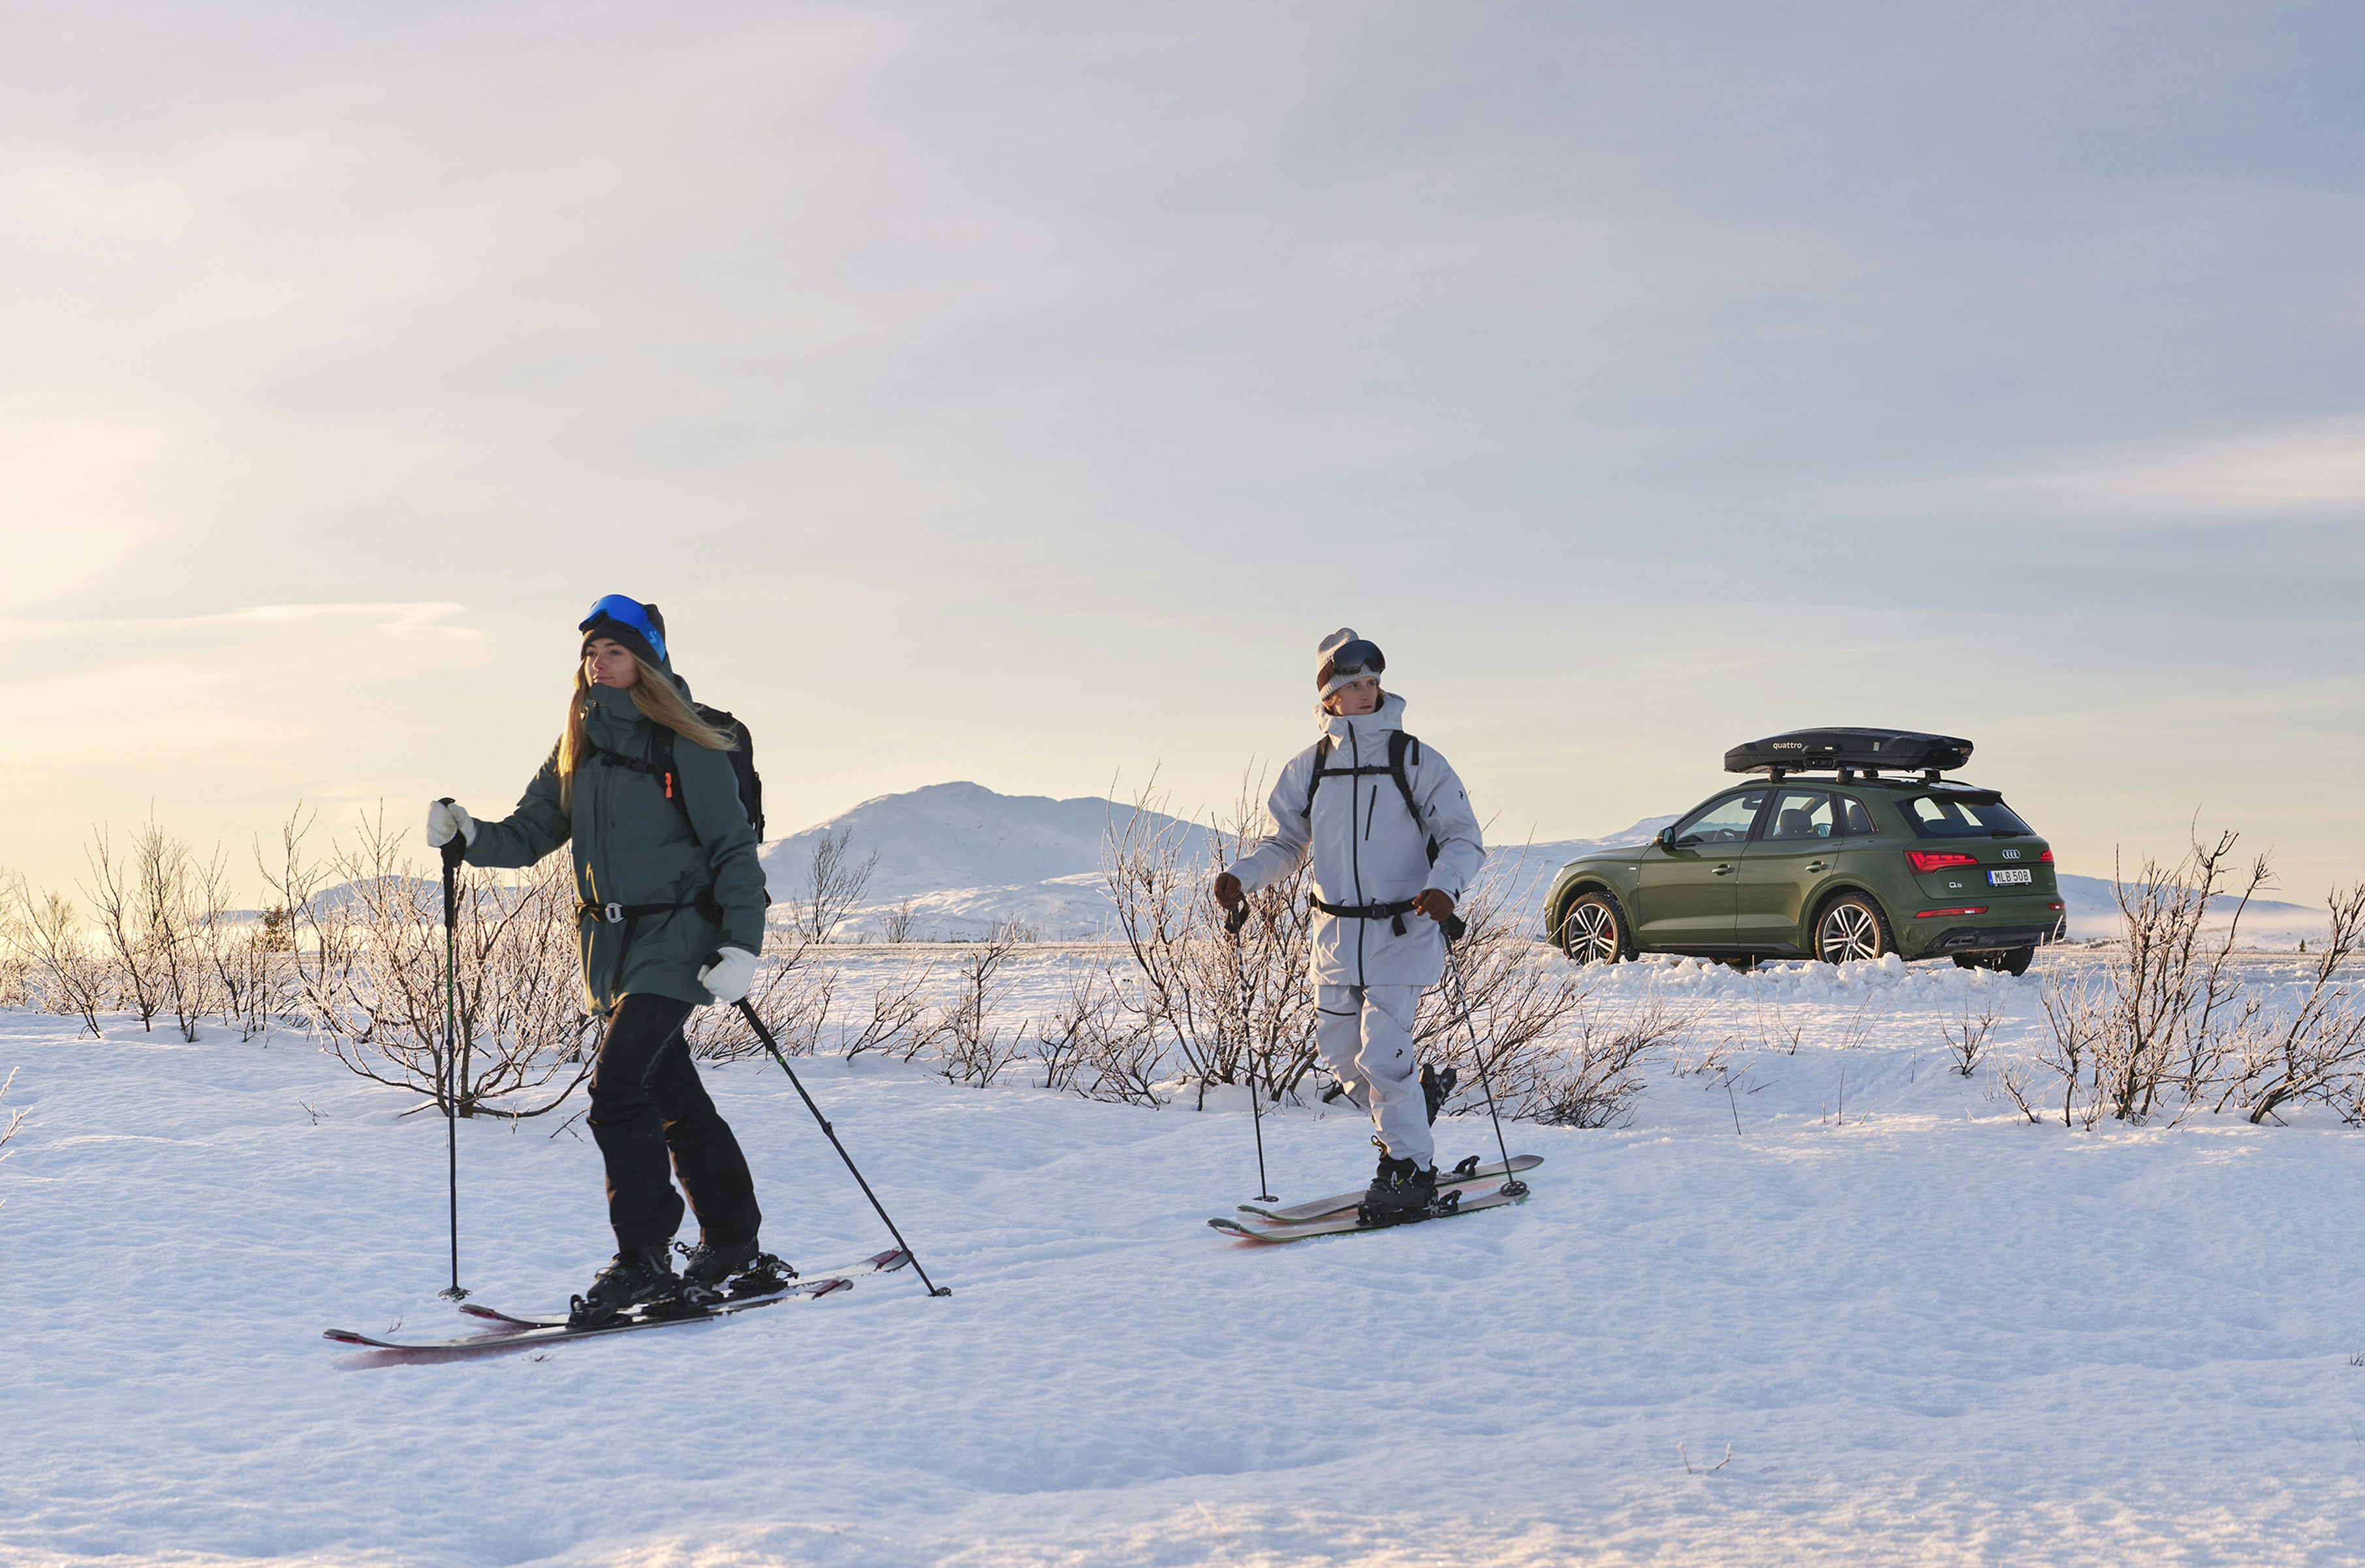 Two people skiing in front of a car